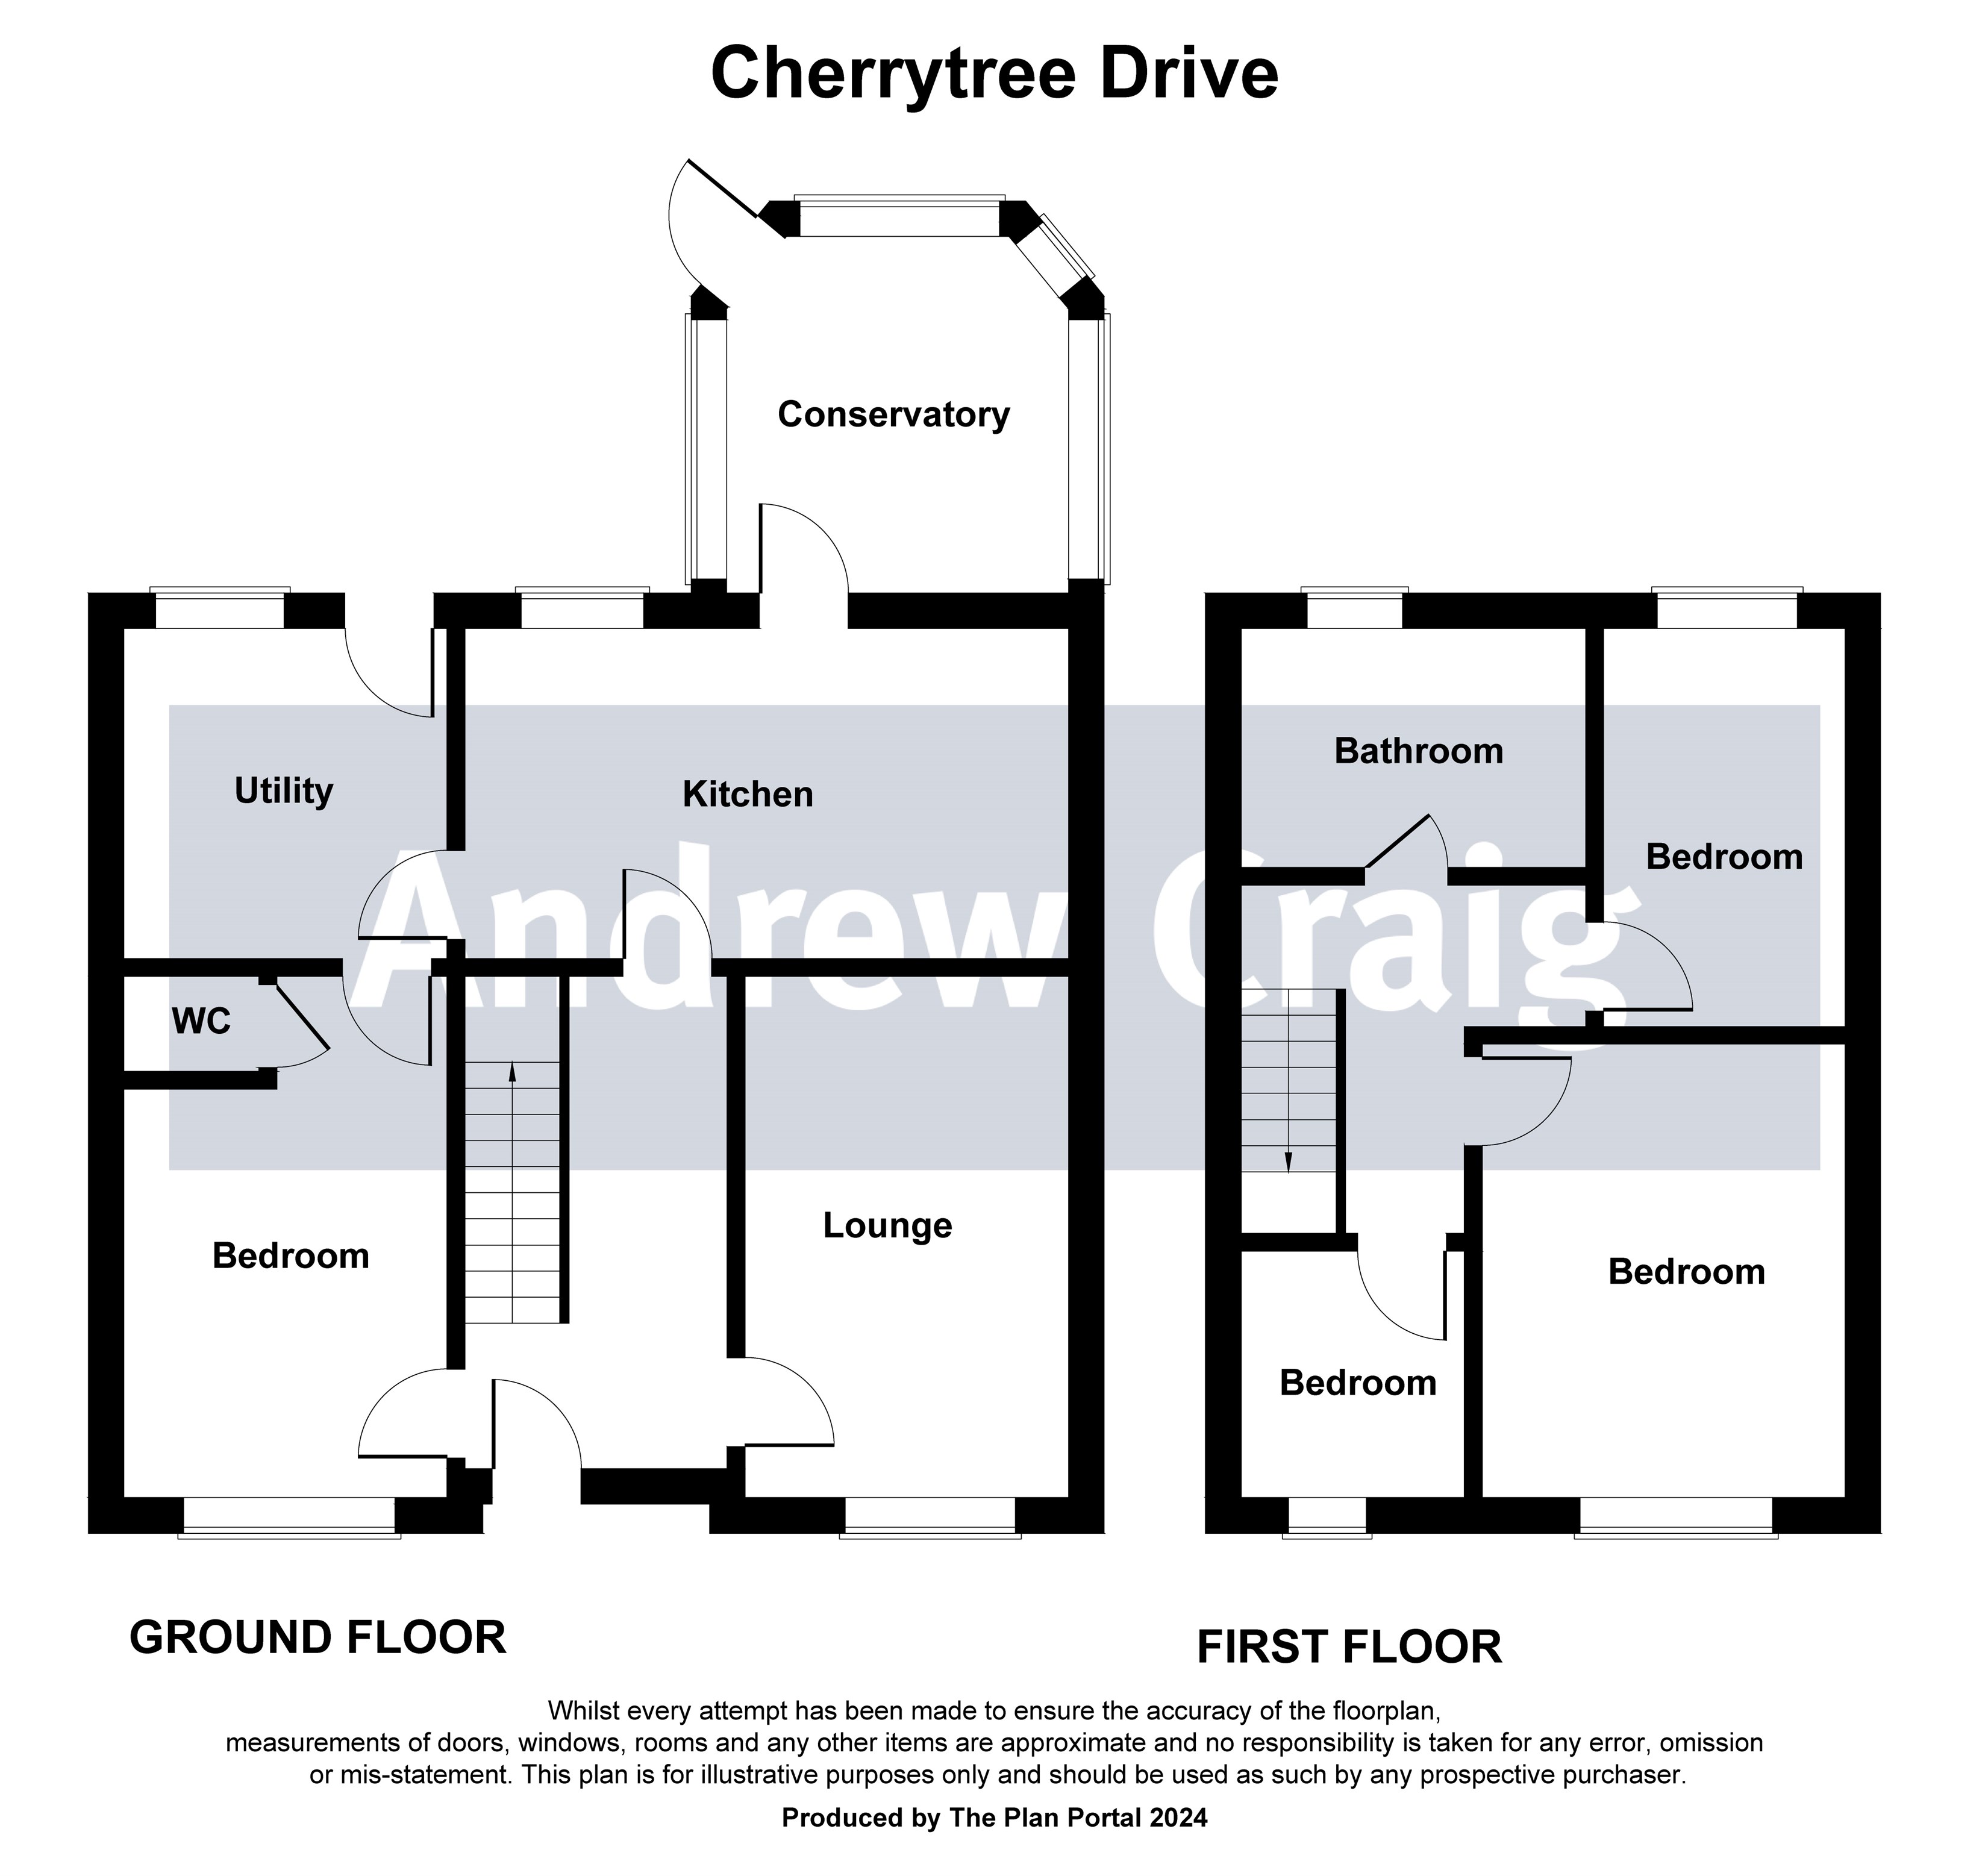 4 bed semi-detached house for sale in Cherrytree Drive, Whickham - Property floorplan